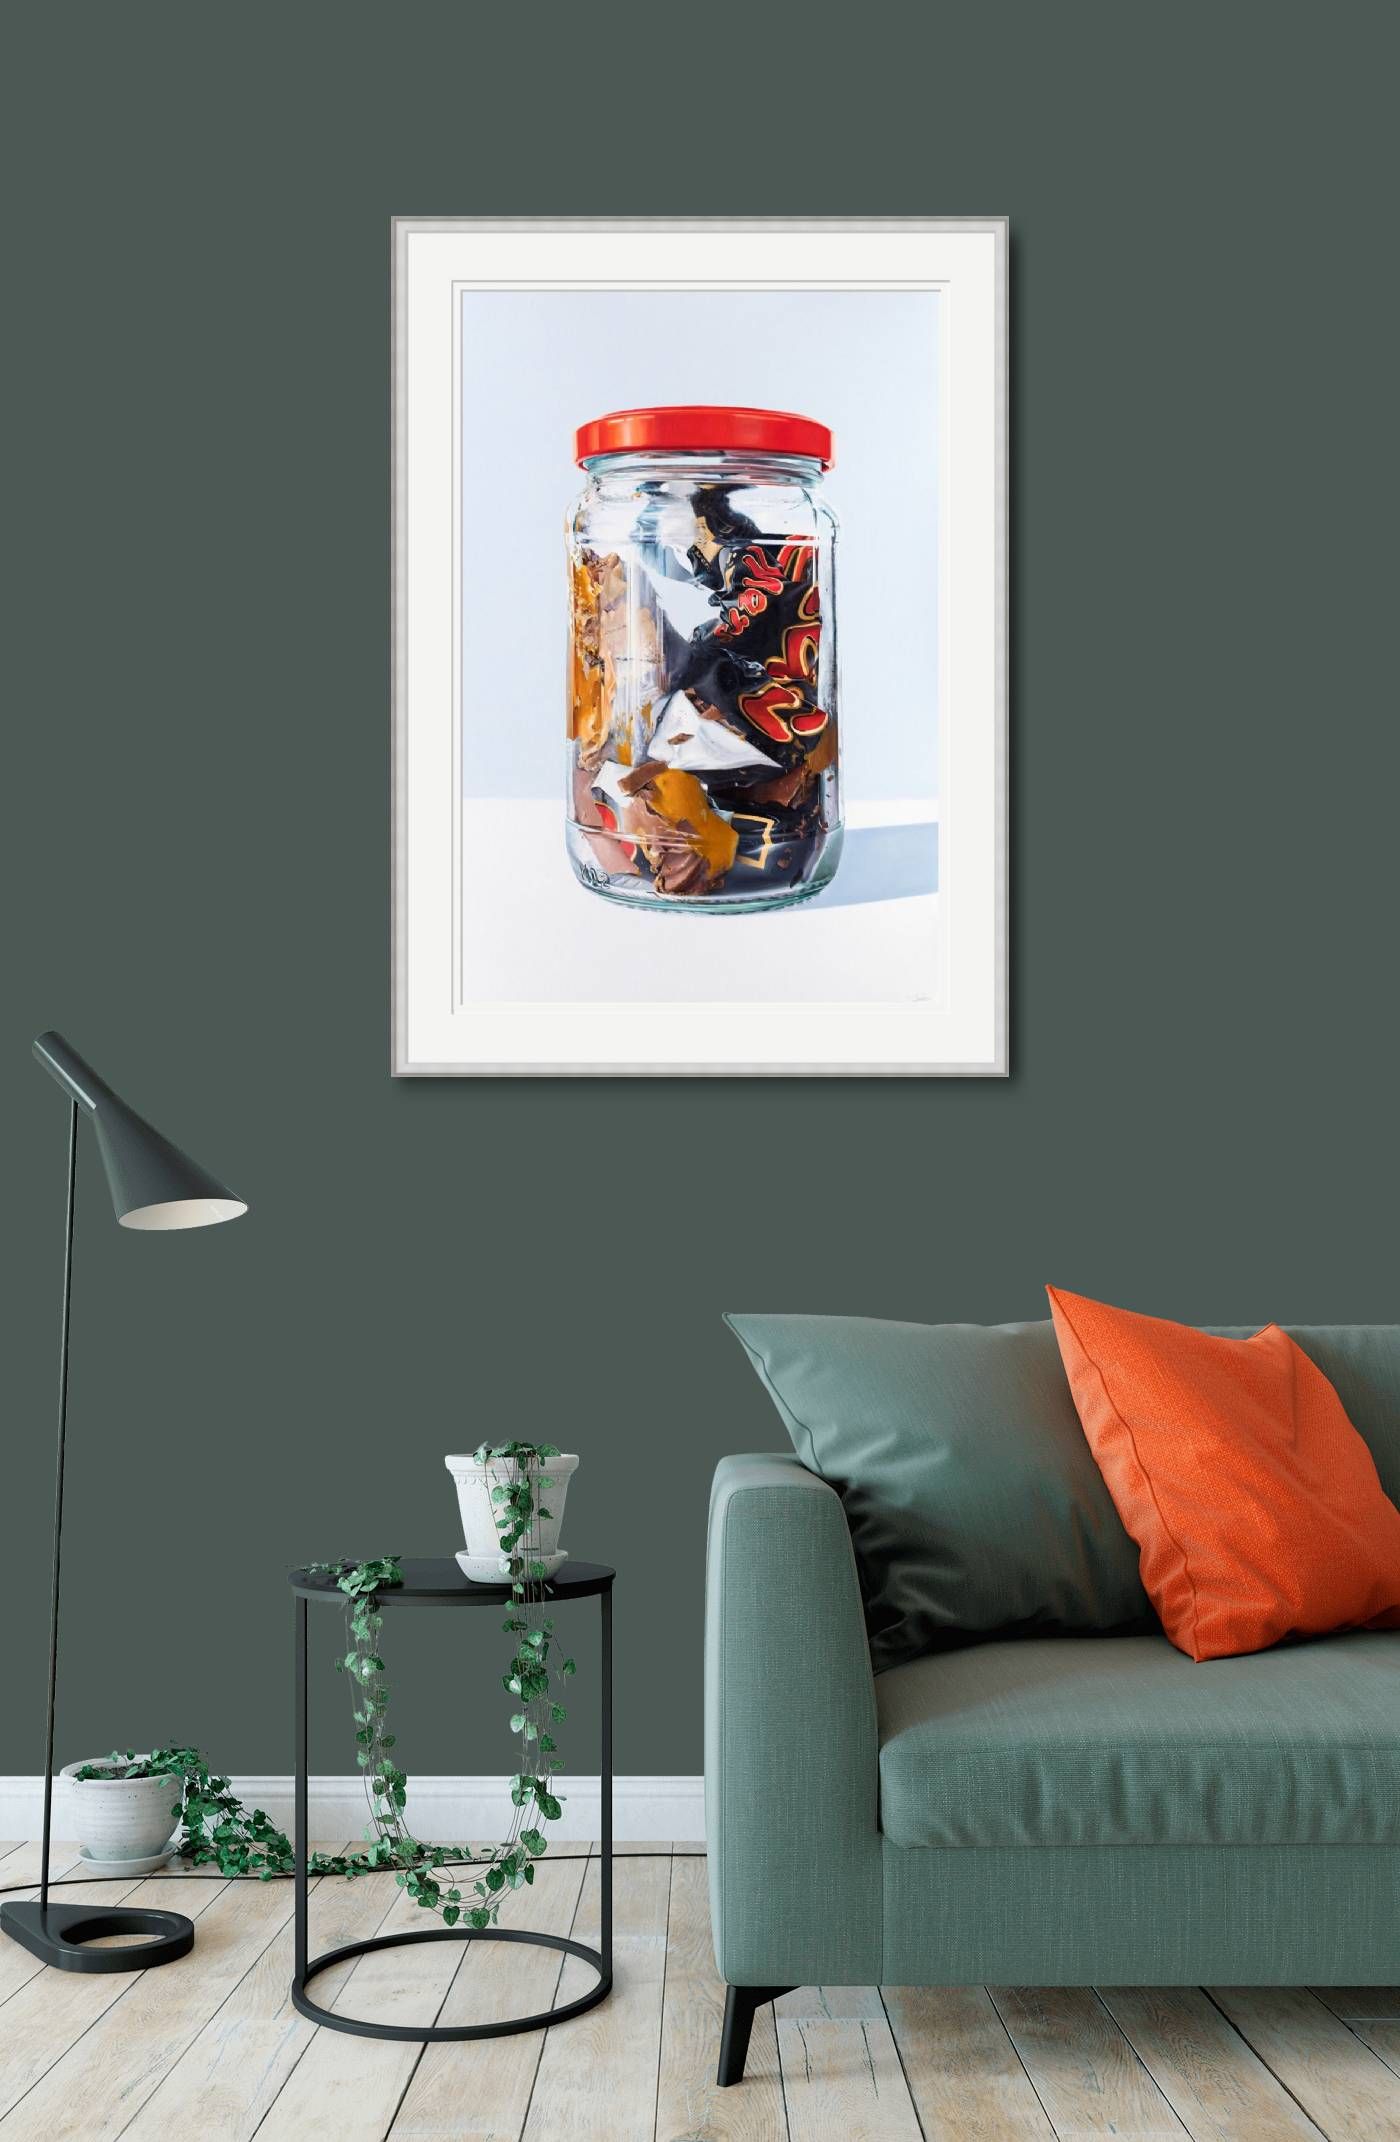 Small - Mars Bar in Jar by Stephen Johntson